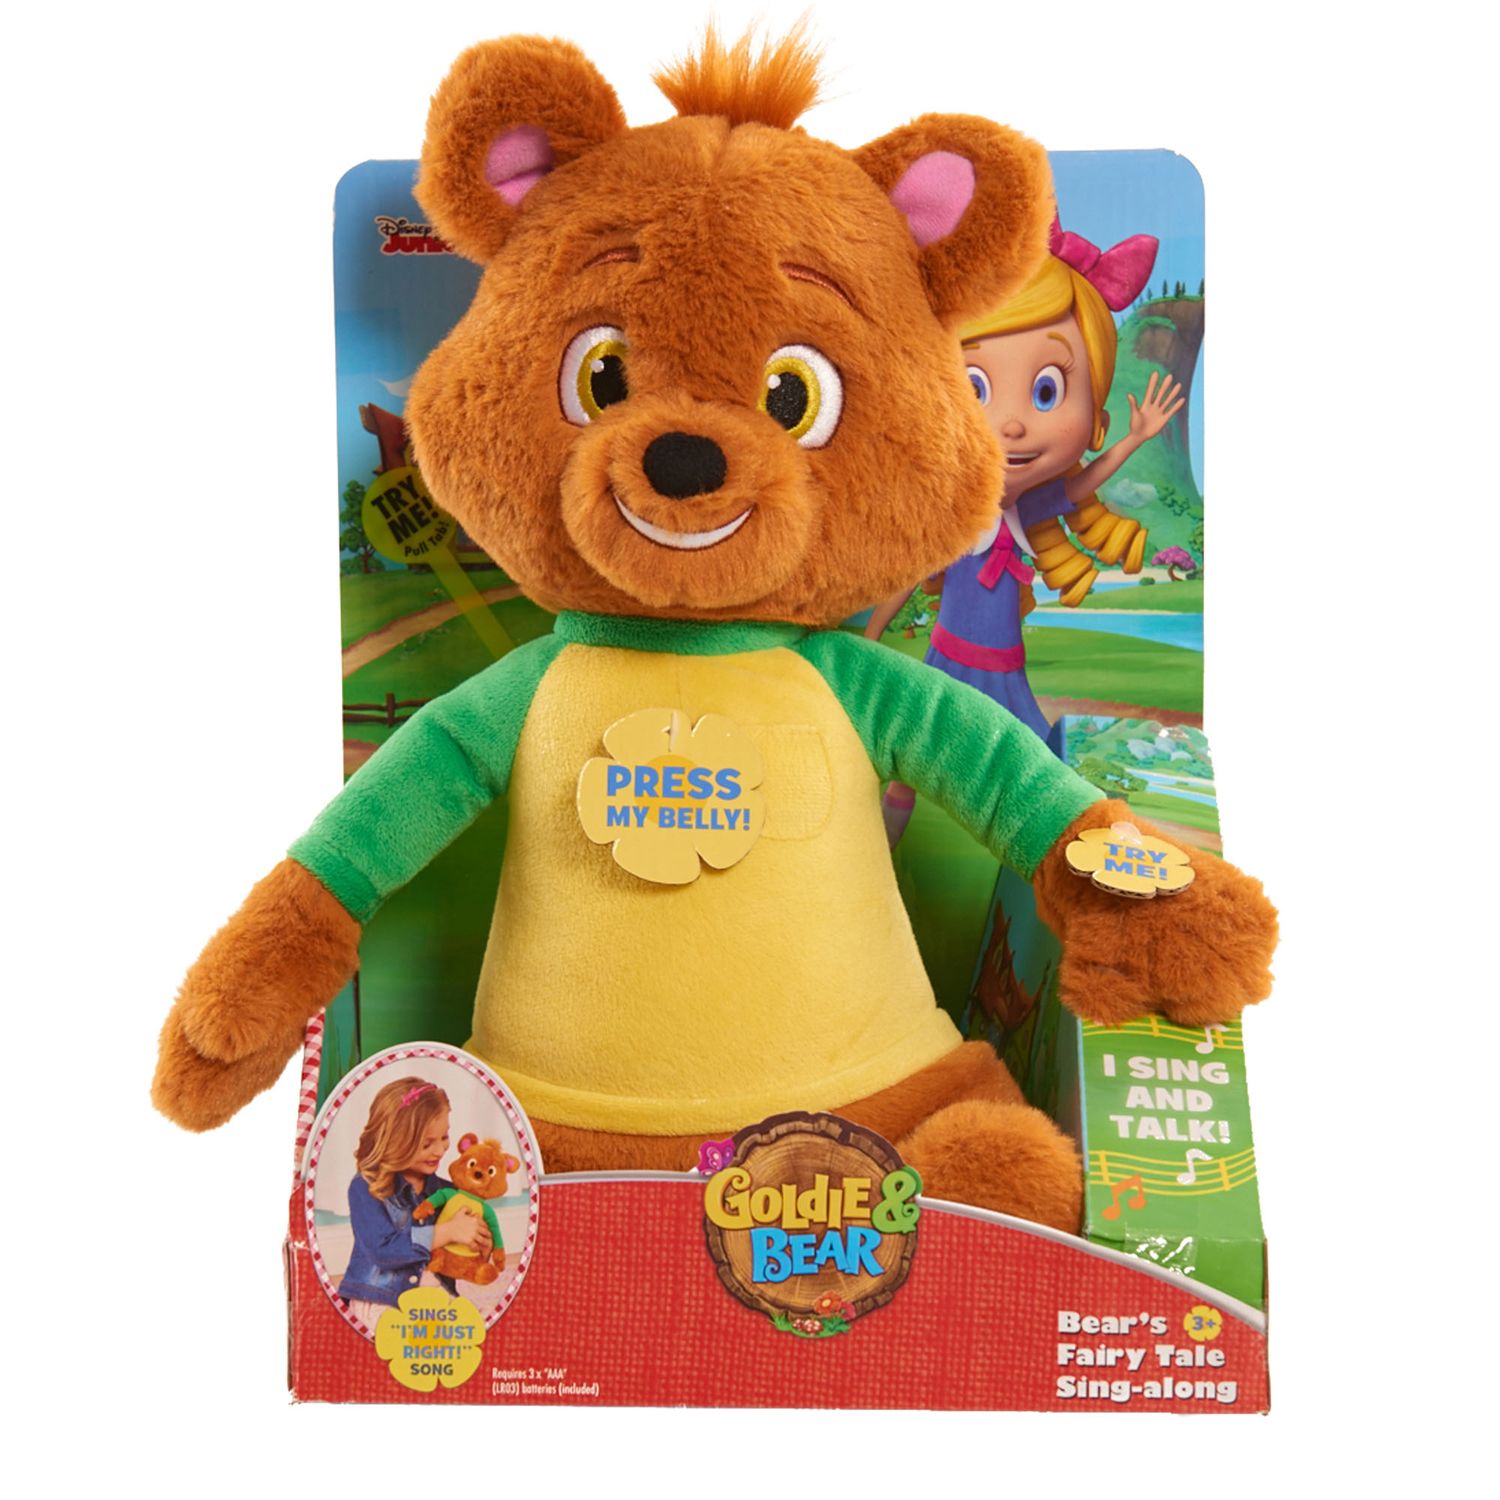 goldie and bear toys